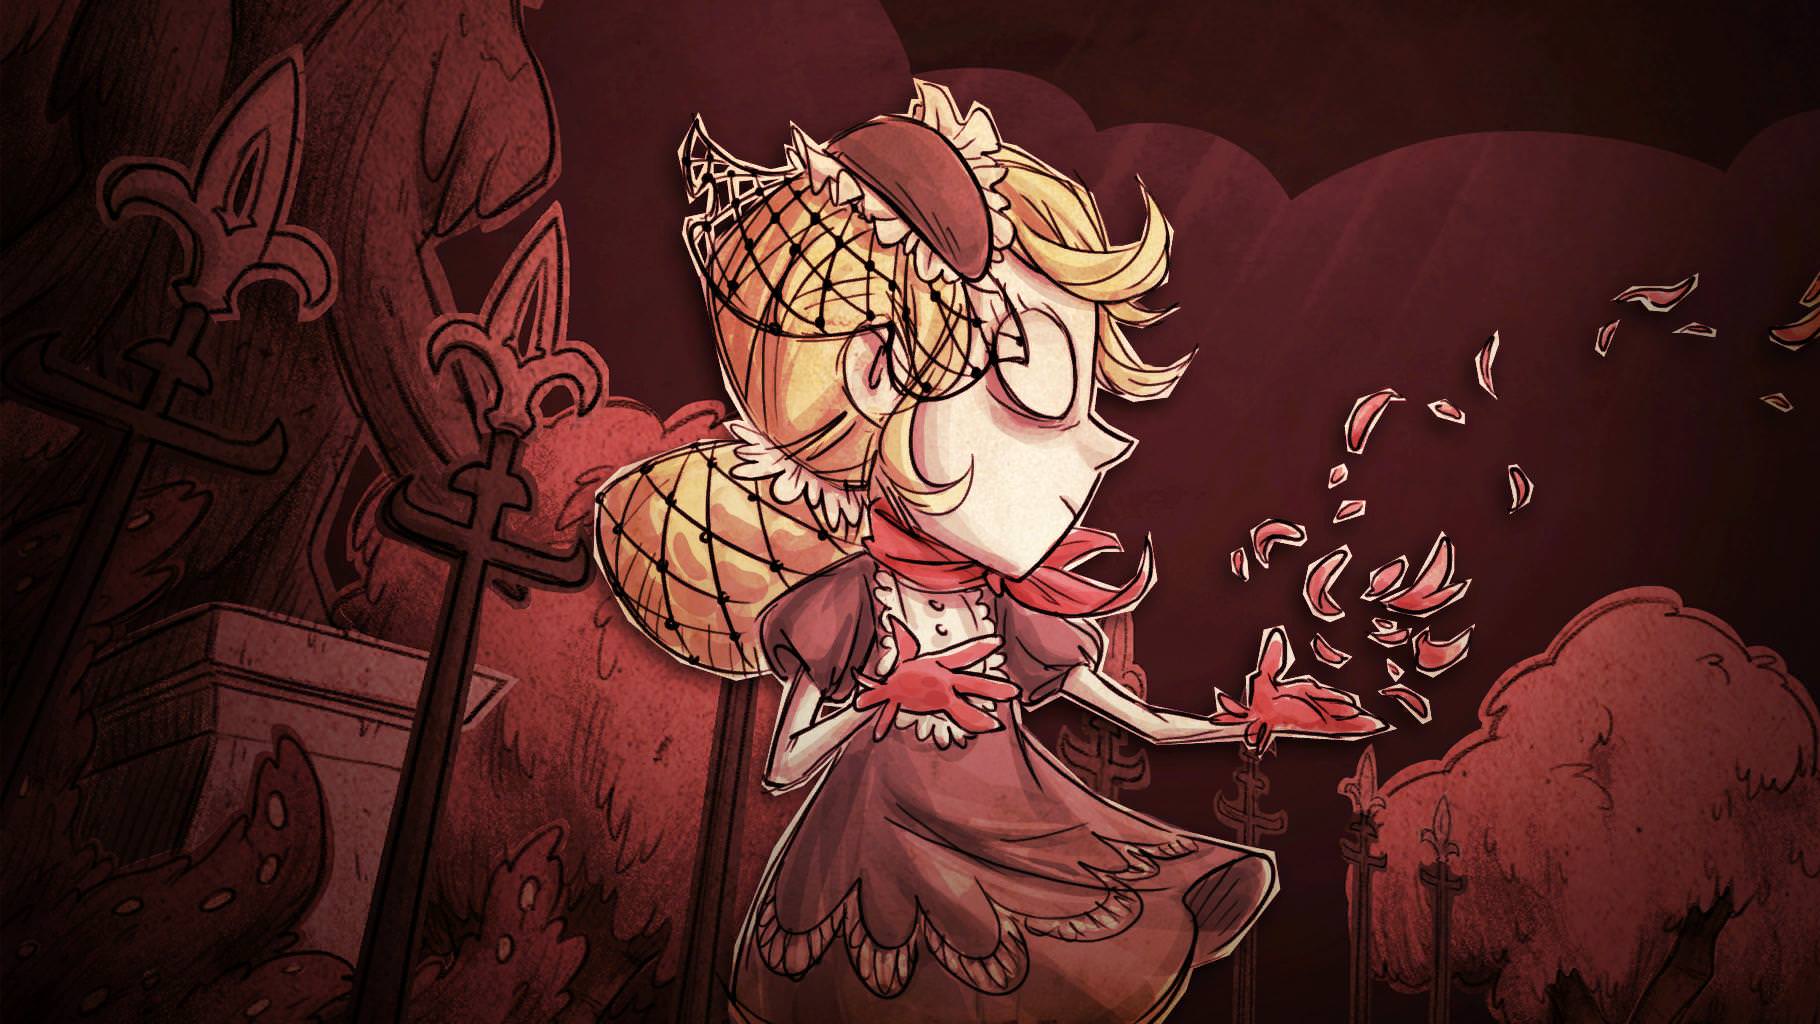 Don't Starve Wallpapers - Top Free Don't Starve Backgrounds